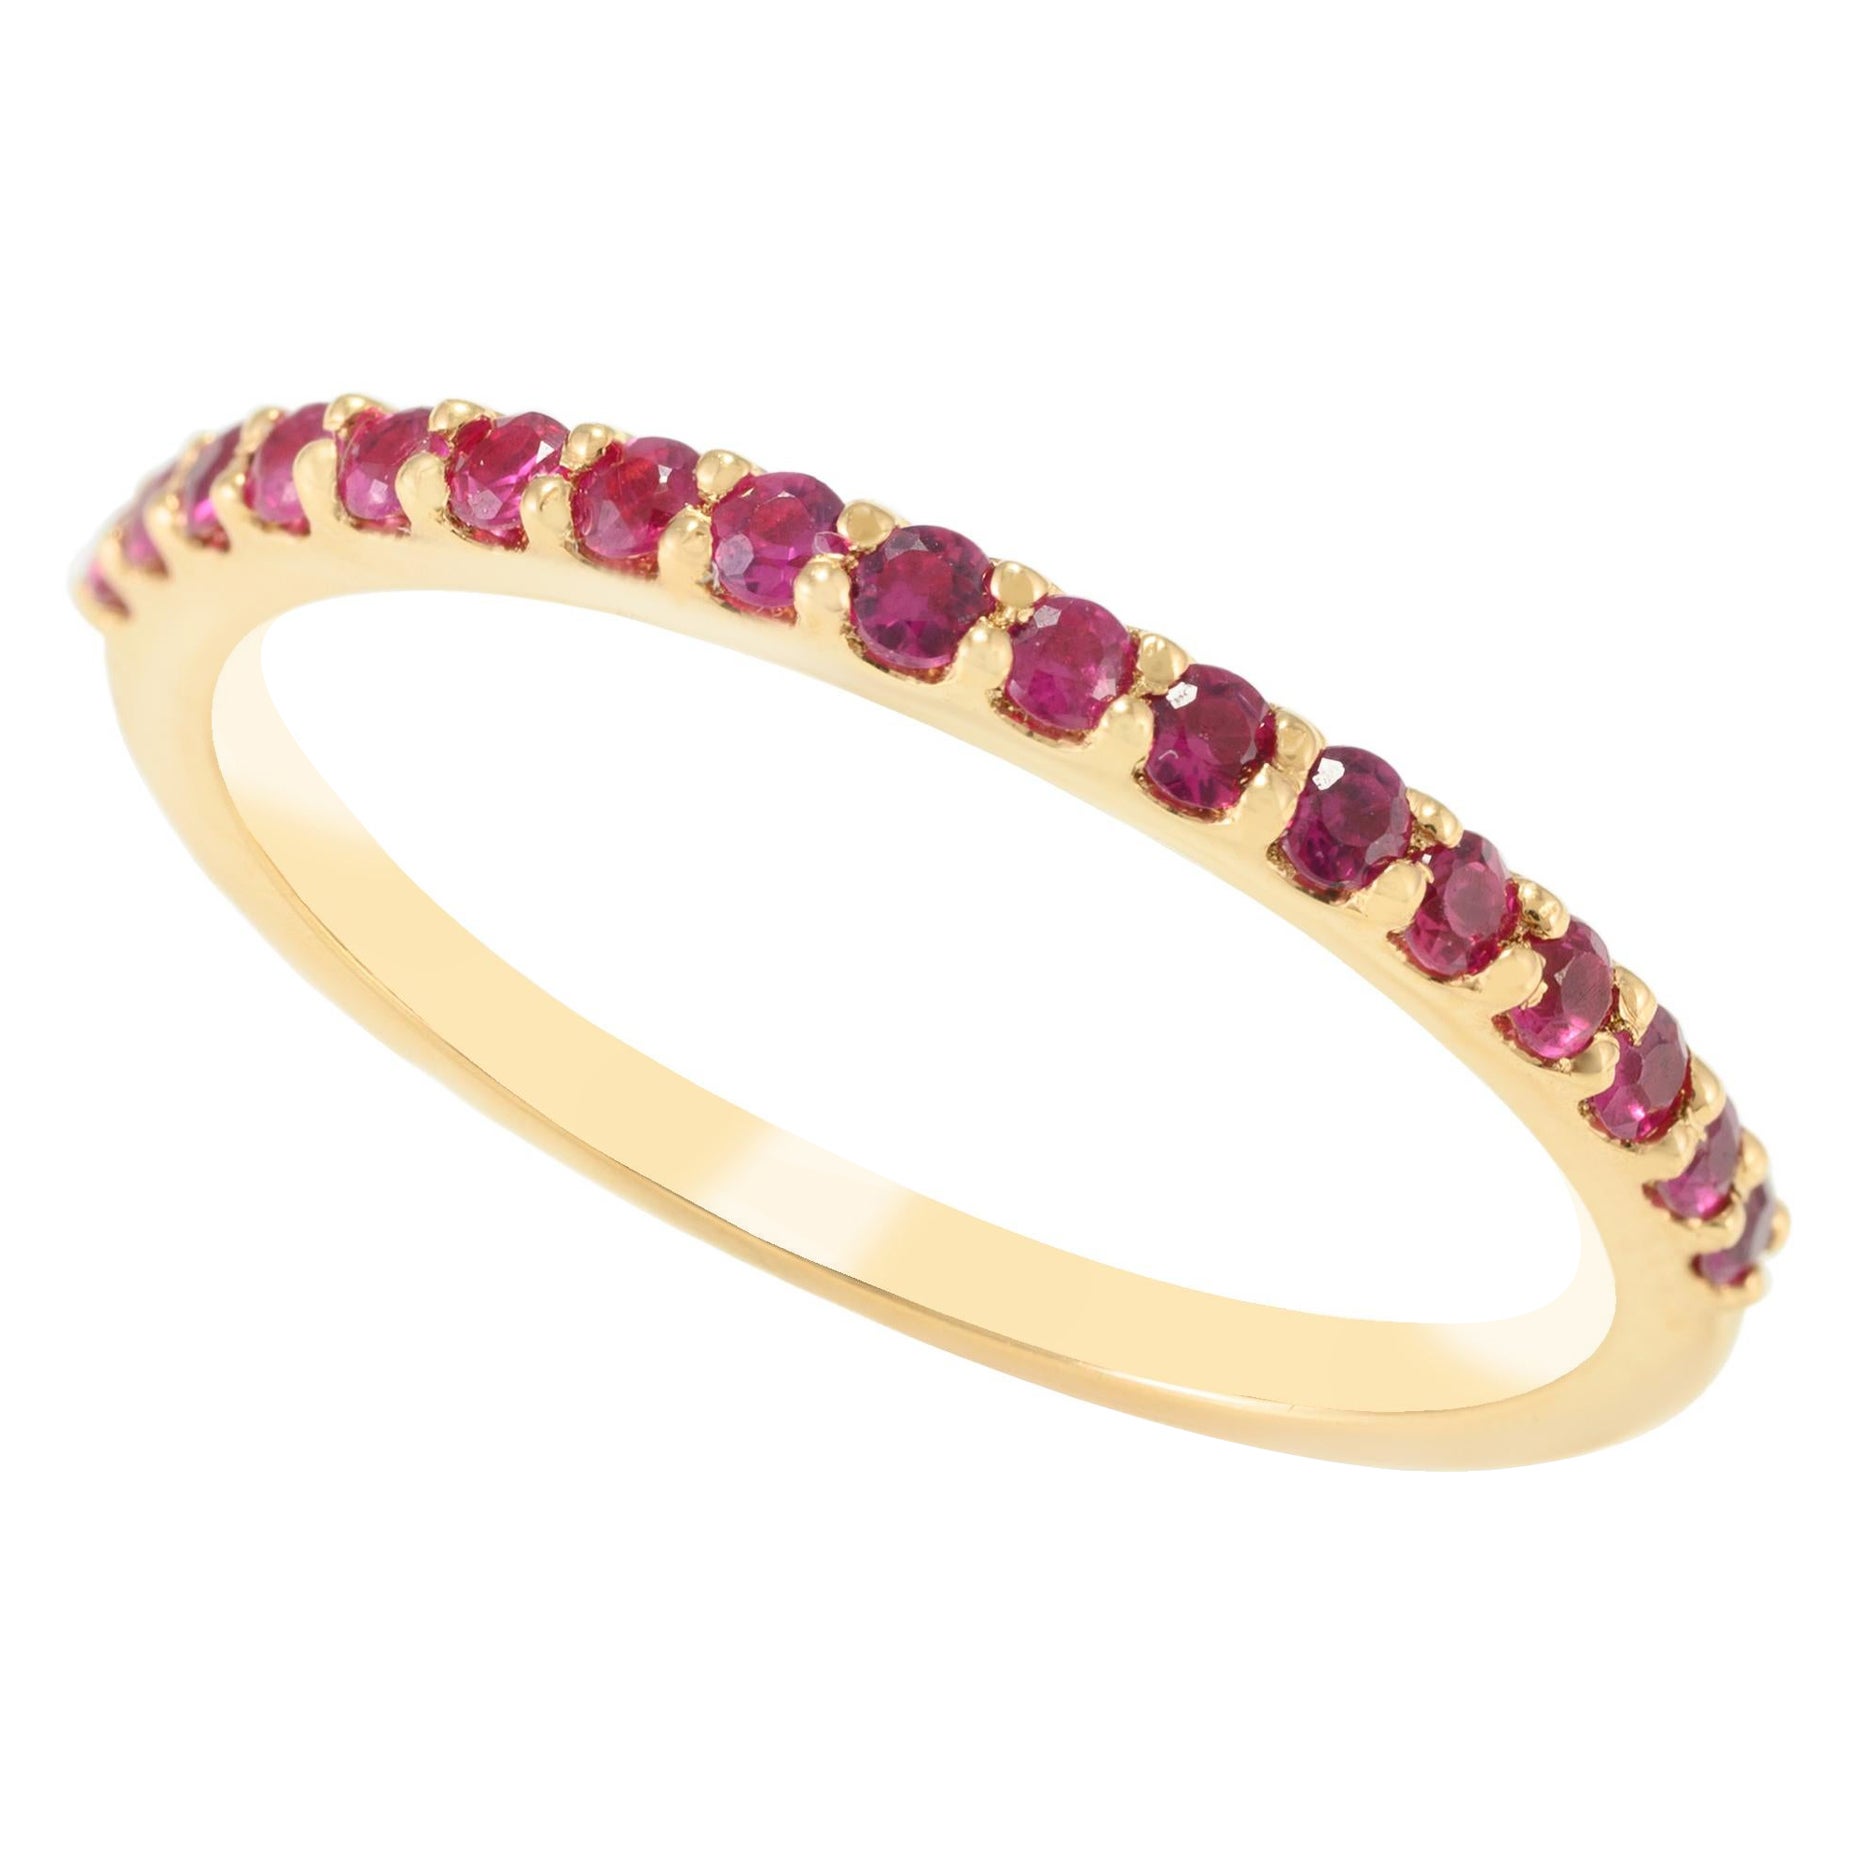 For Sale:  18k Solid Yellow Gold Stackable Round Cut Pave Ruby Gemstone Half Eternity Band